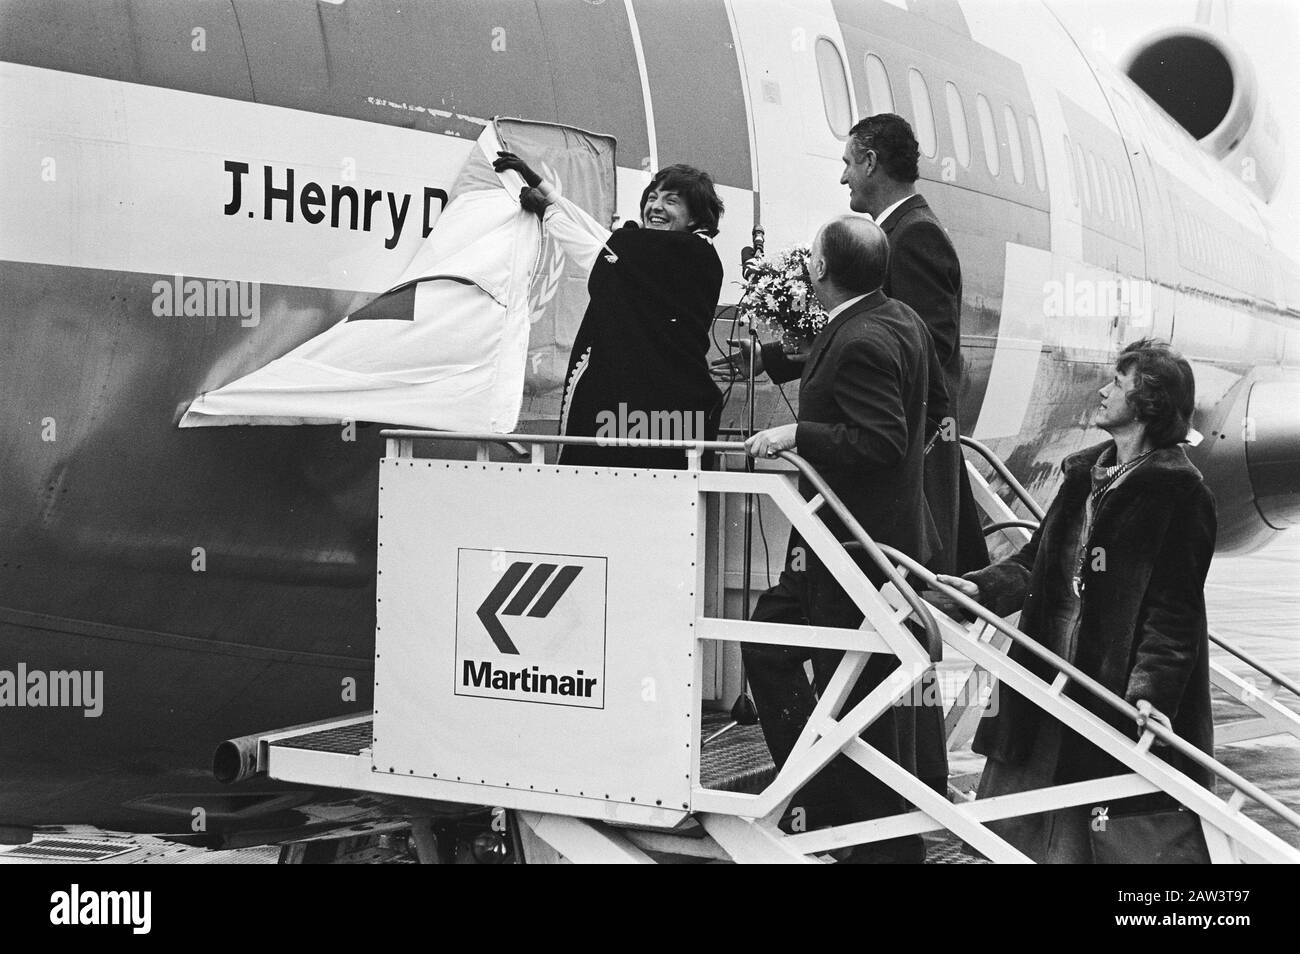 Pr. Daisy-named DC 10 at the airport to Henry J. Dunant freight relief supplies to Cambodia  Princess Margaret during name disclosure; the DC-10 is used for the freight transport of relief supplies to Cambodia; behind the princess Gualtherus [Guup] baron Kraijenhoff, chairman of the Dutch Red Cross (L) Martin Schröder, director of Martinair Date: November 23, 1979 Location: North-Holland, Schiphol Keywords: directors, princesses, rituals, airplanes Person Name: Kraijenhoff, Gualtheris baron, Kraijenhoff, Guup, Margriet (princess Netherlands), Schröder, Martin Stock Photo